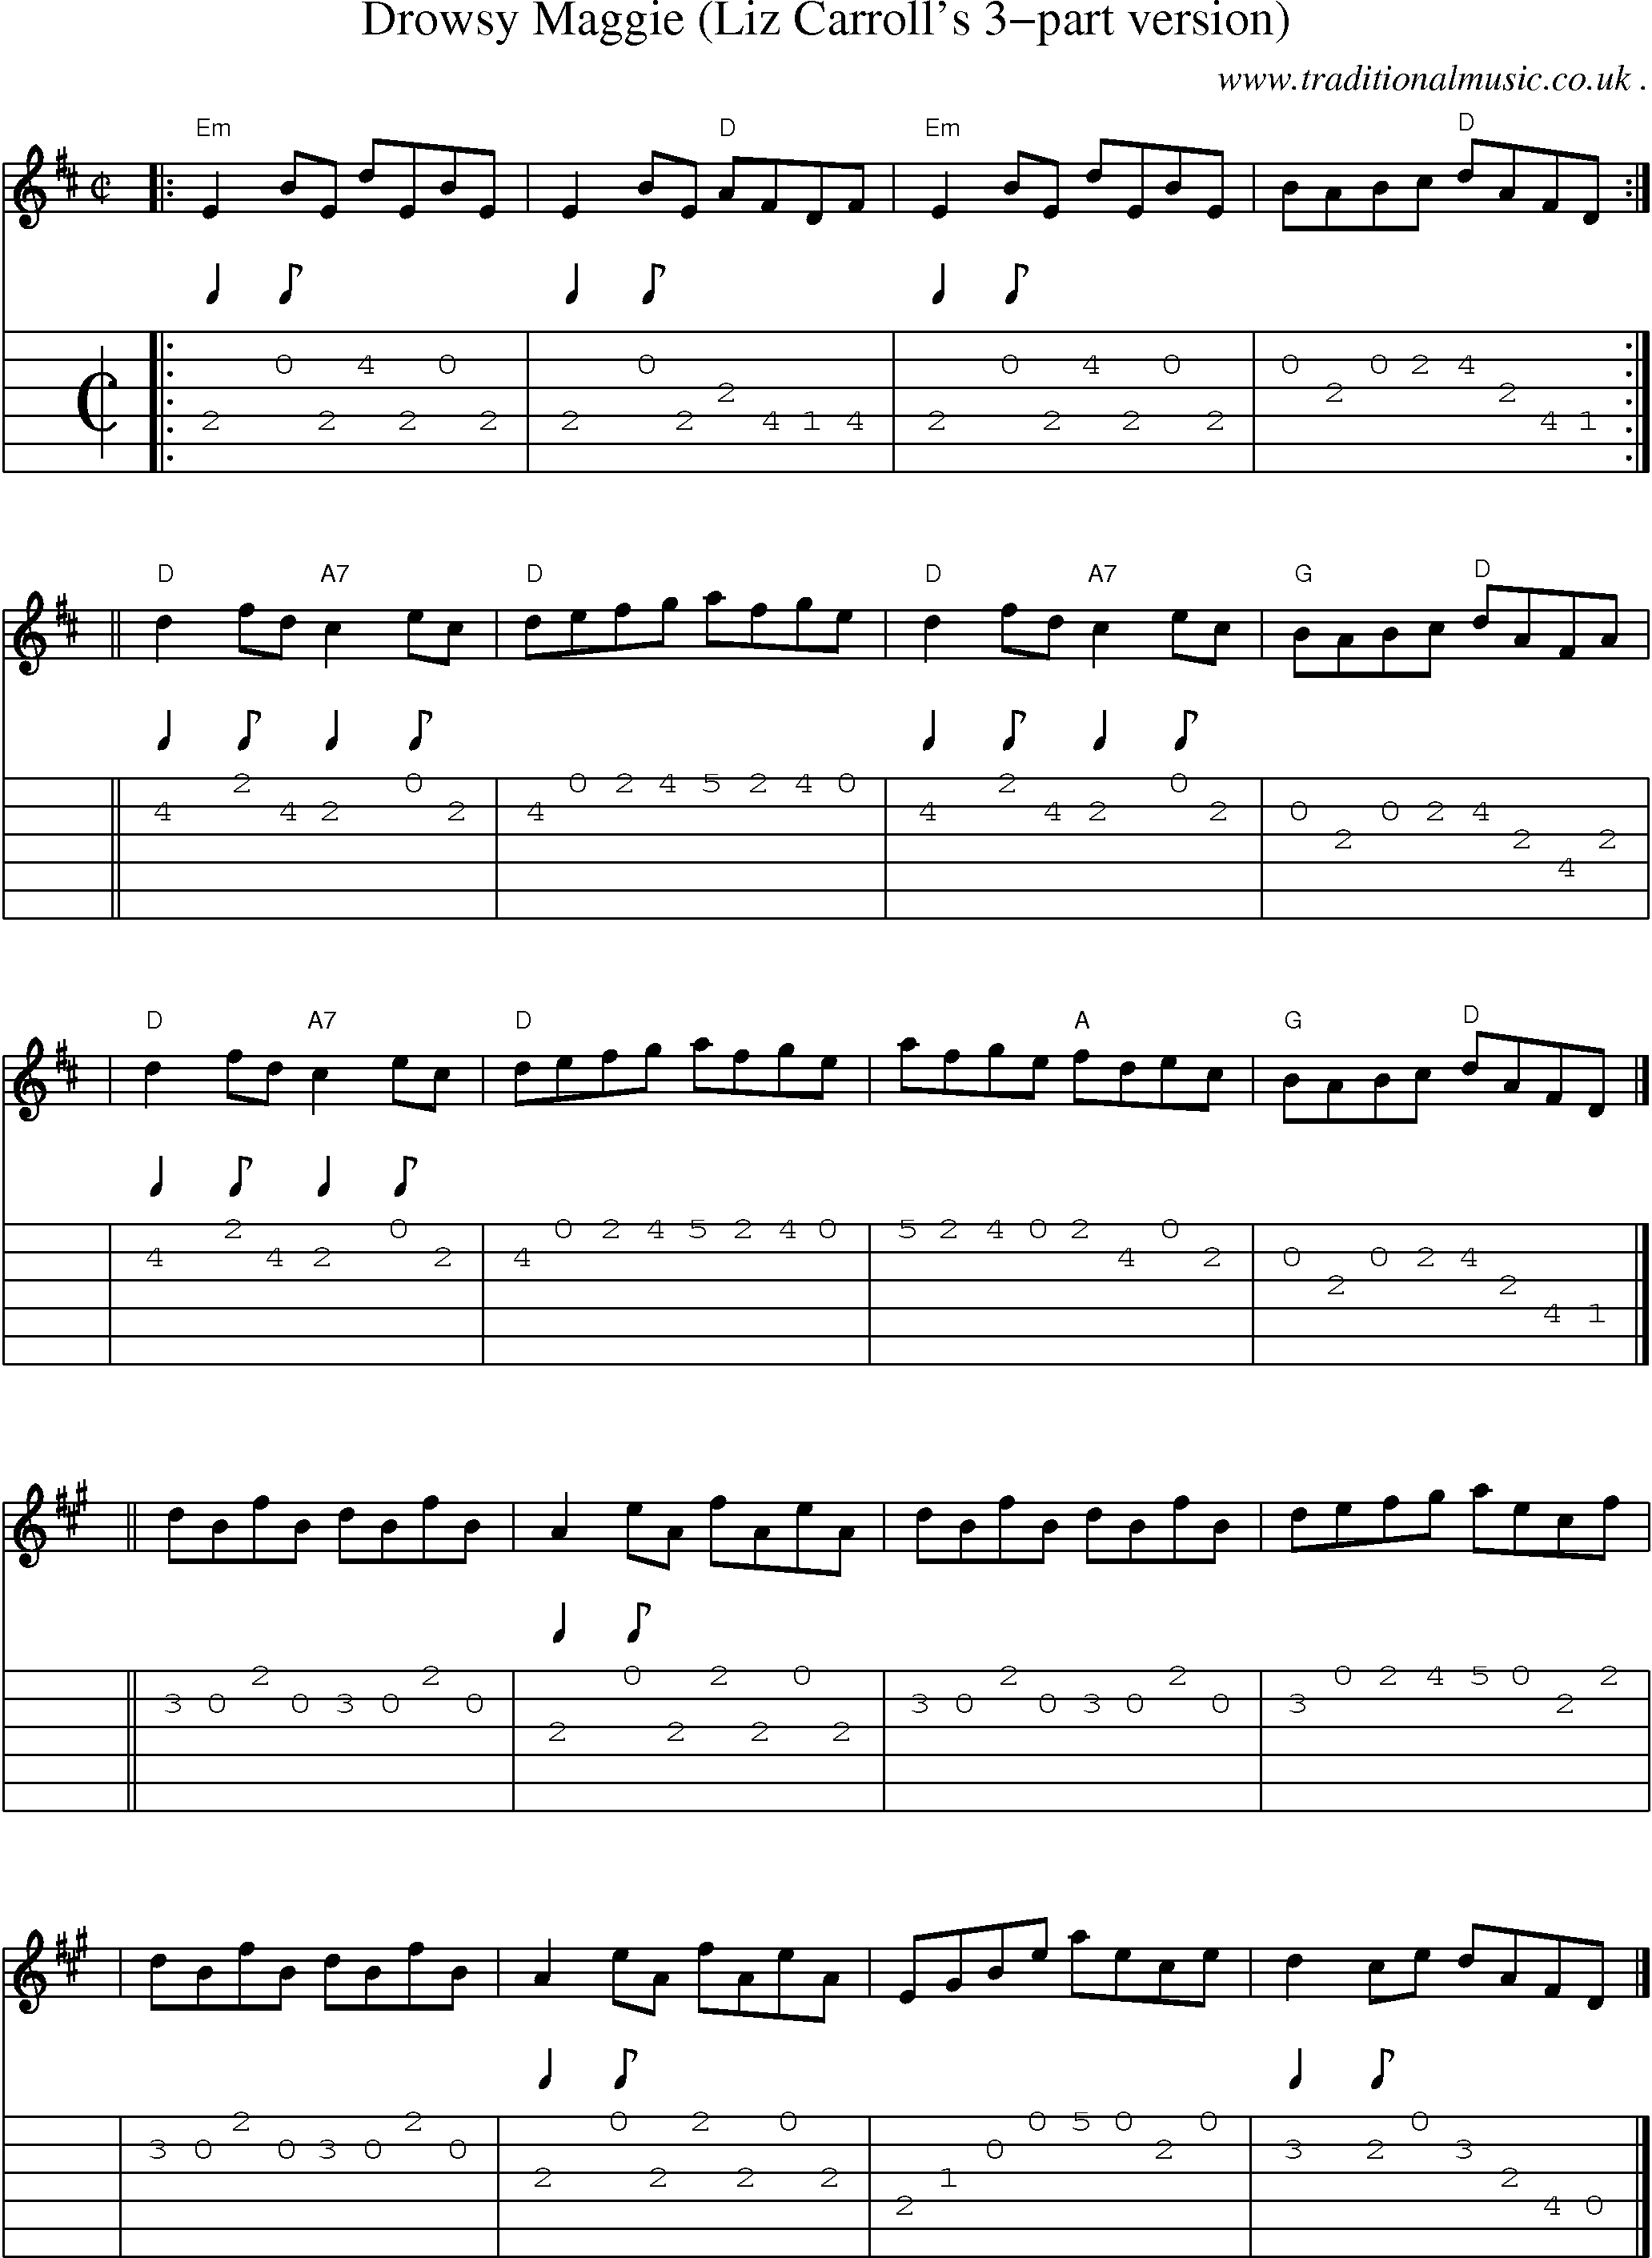 Sheet-music  score, Chords and Guitar Tabs for Drowsy Maggie Liz Carrolls 3-part Version